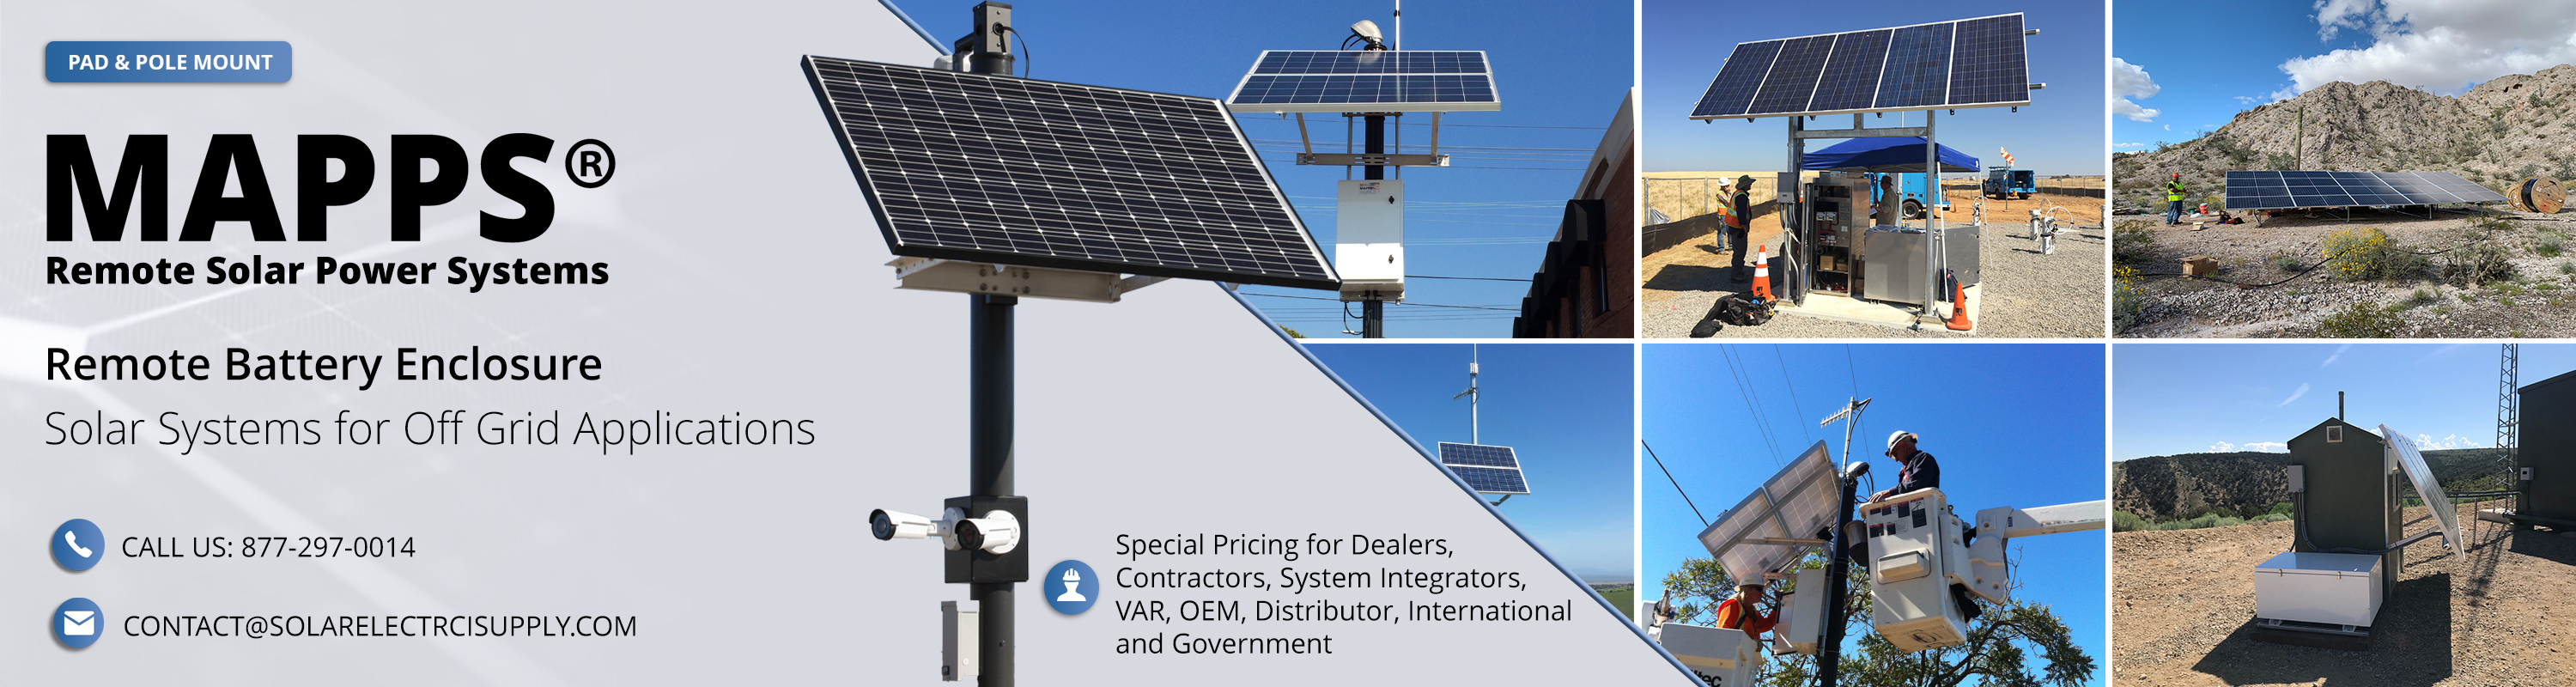 Solar Electric Supply MAPPS Systems Banner